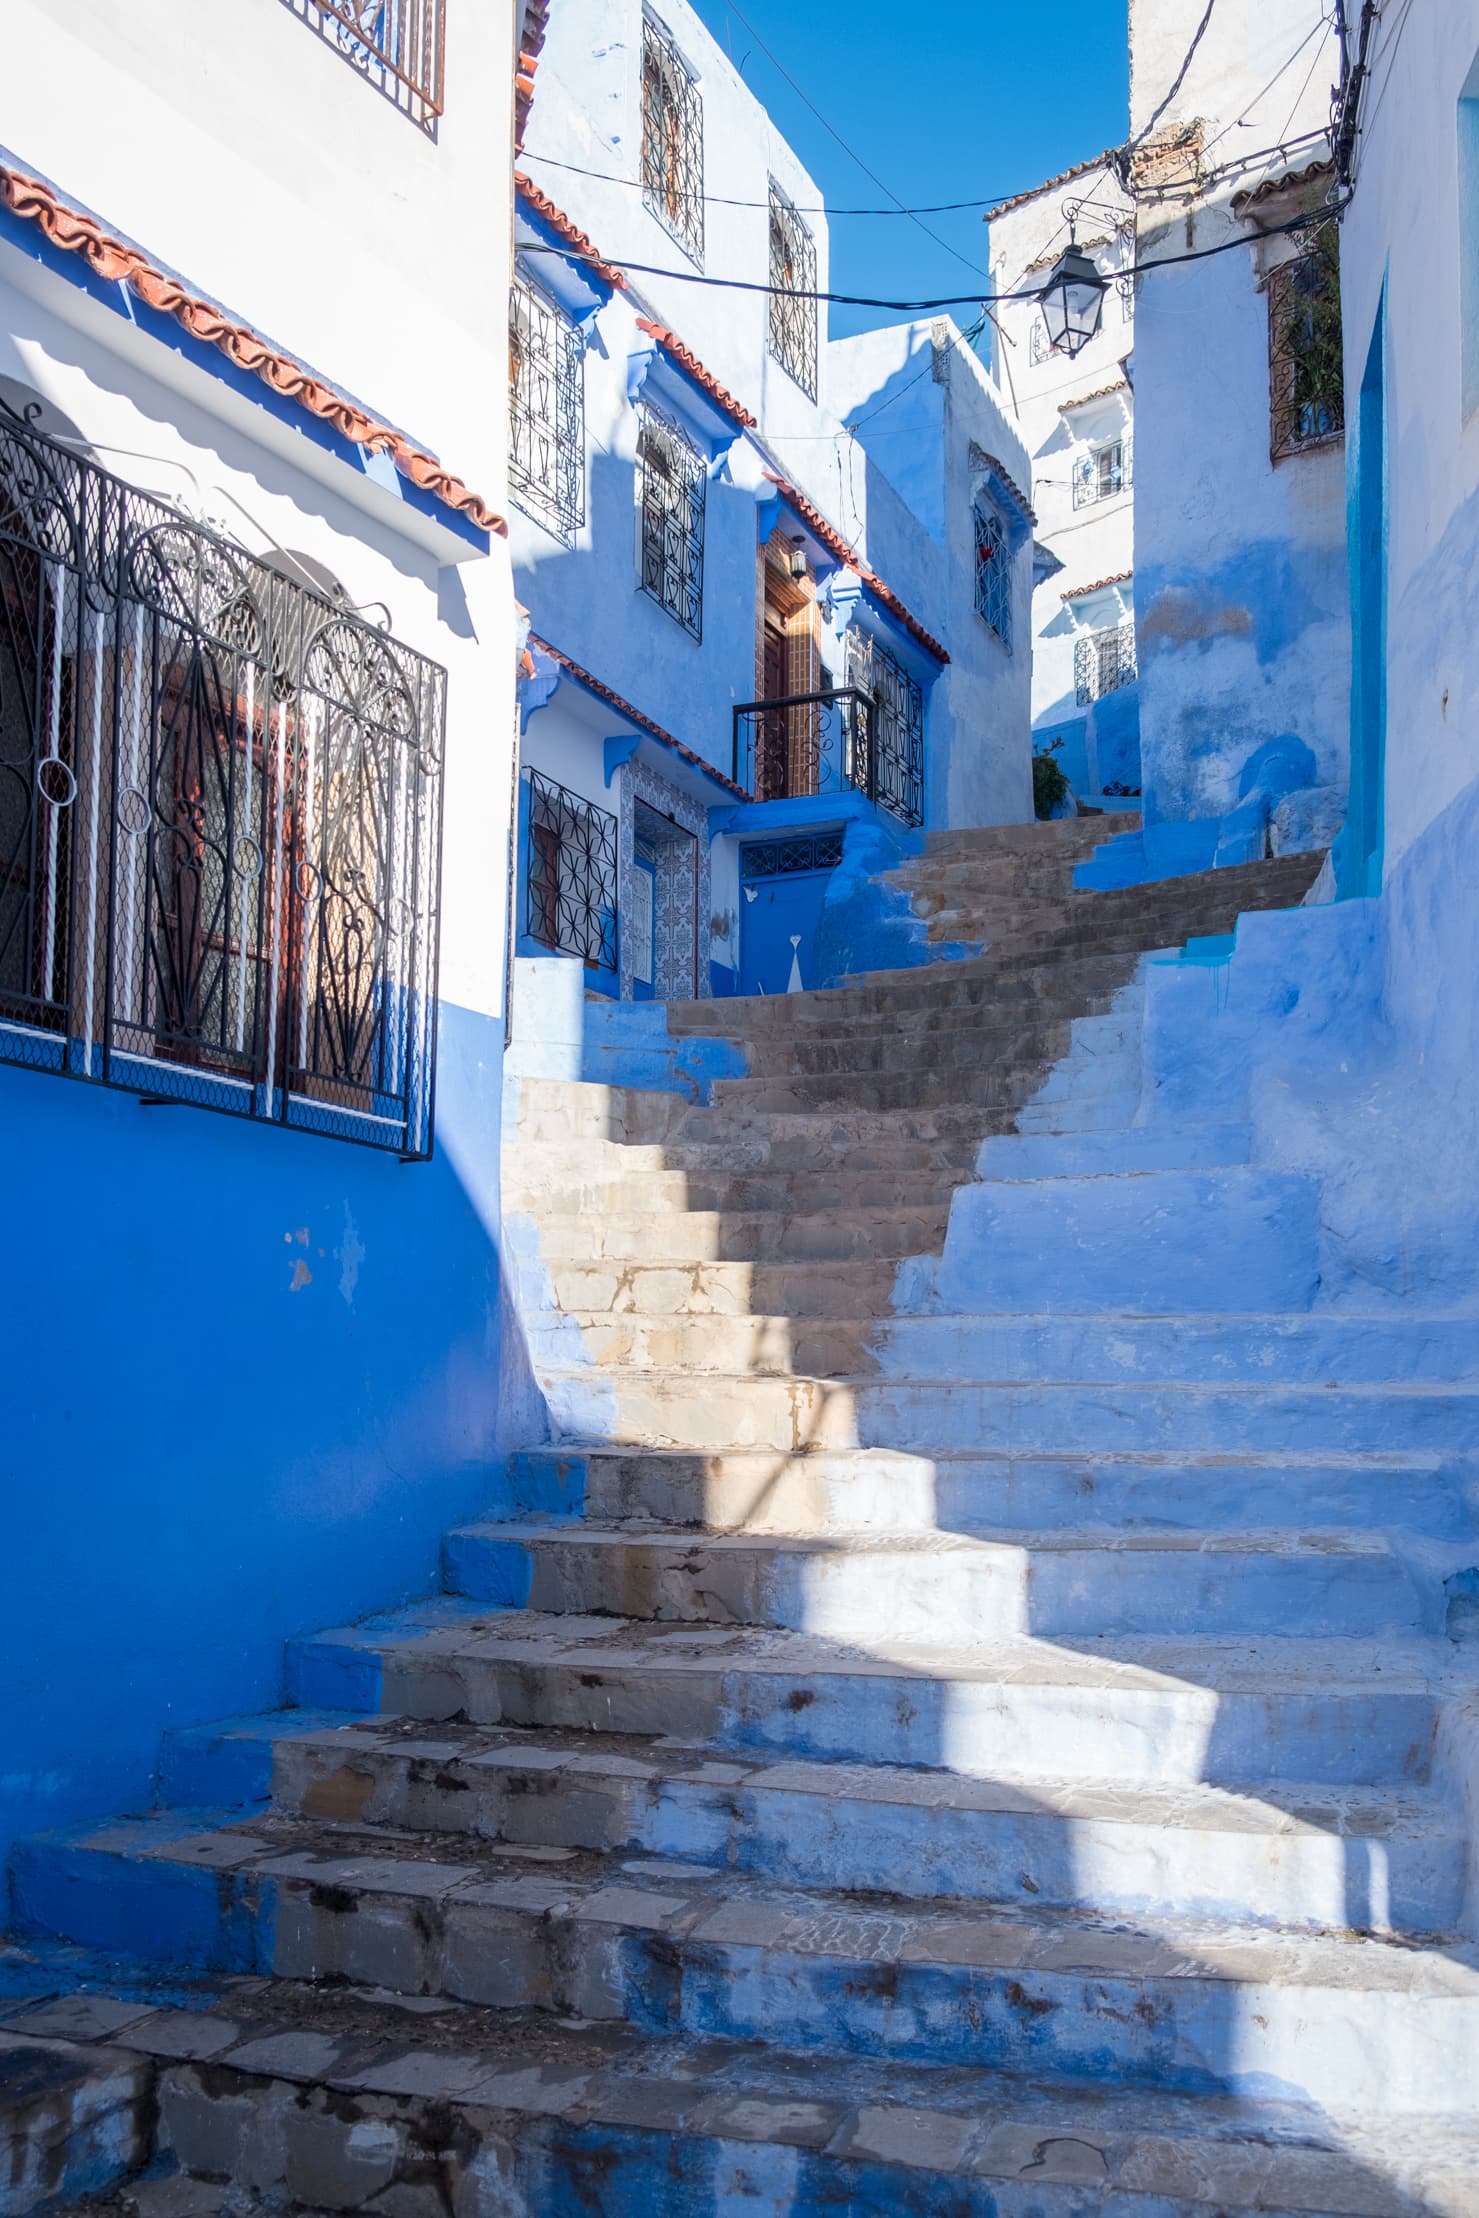 A steep staircase surrounded by blue houses, Chefchaouen, Morocco